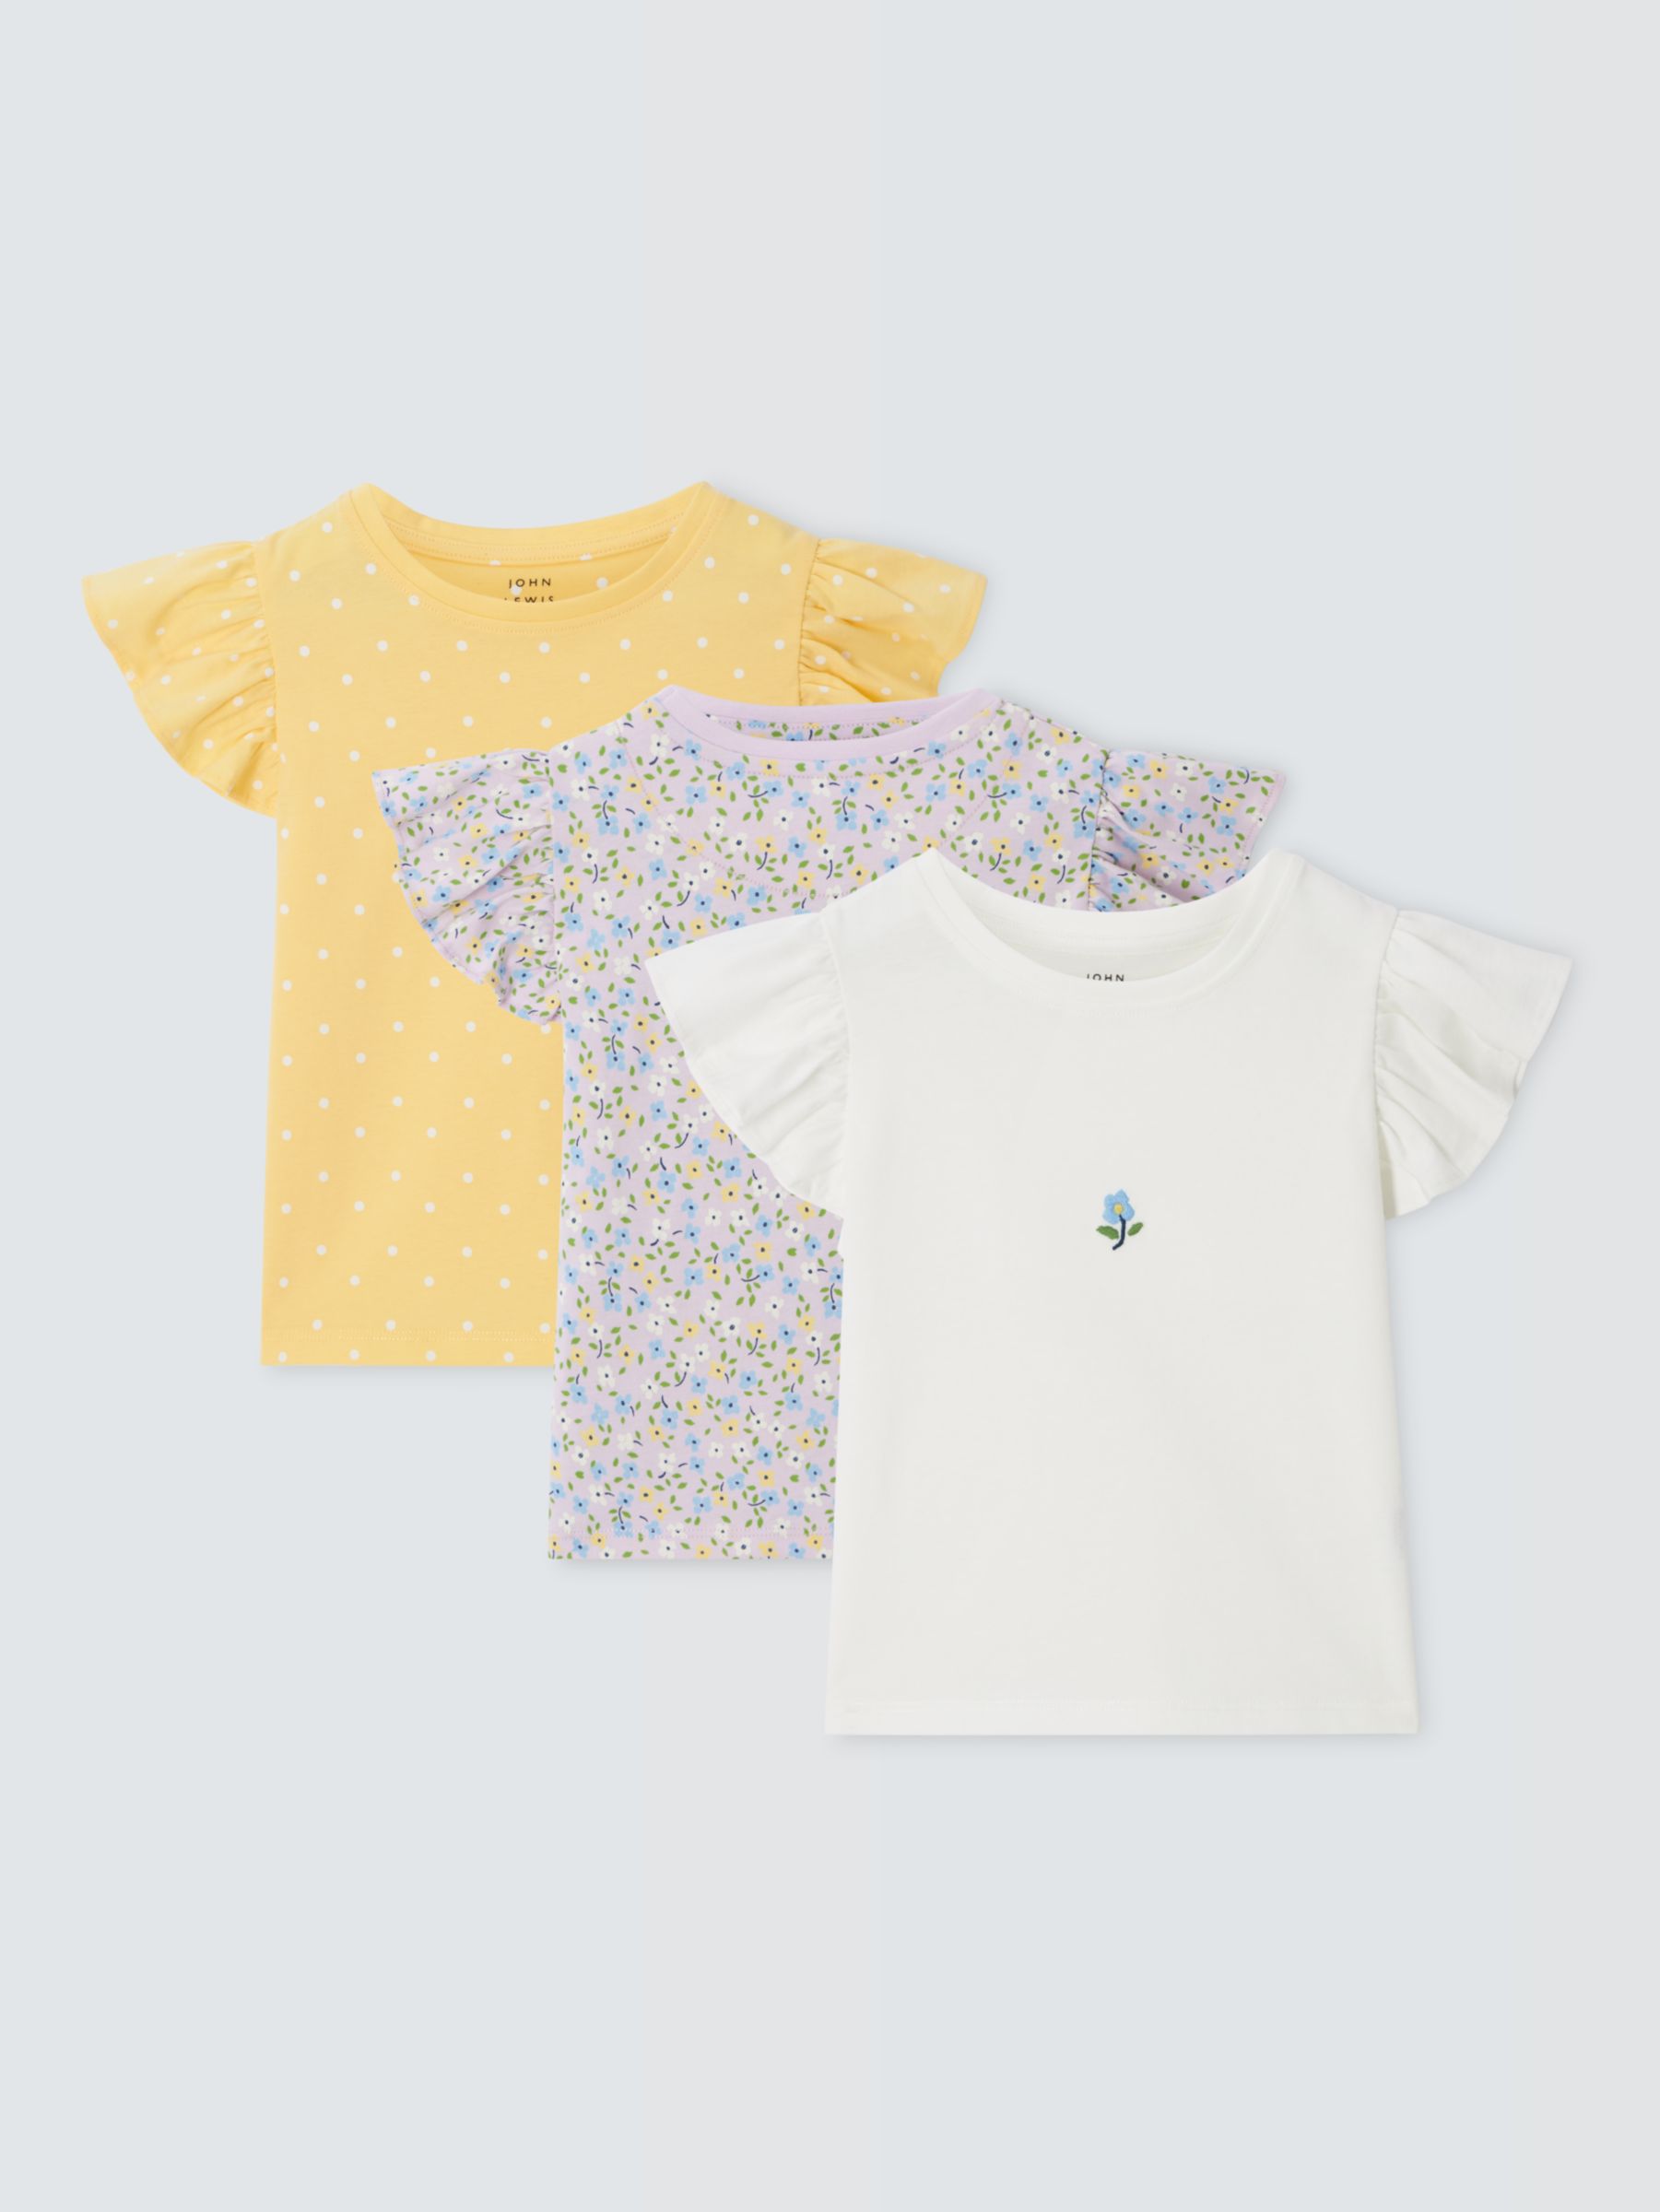 John Lewis Kids' Spot/Floral/Flower Frill Sleeve T-Shirts, Pack of 3, Multi, 7 years